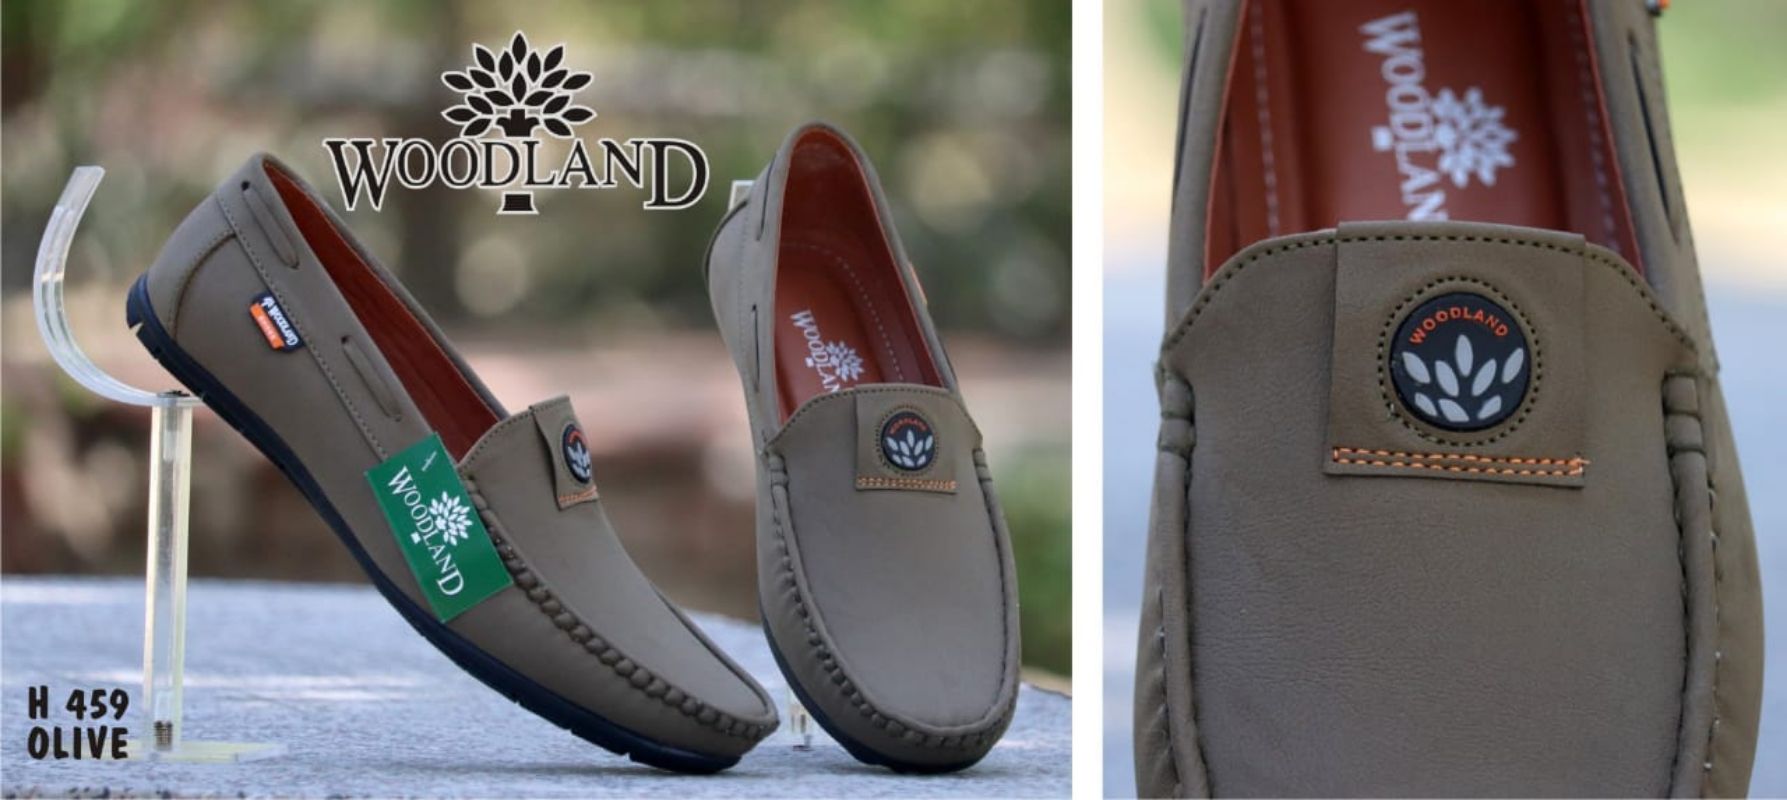 Style SHOES - Flat 15% off on Woodland Shoes, only at... | Facebook